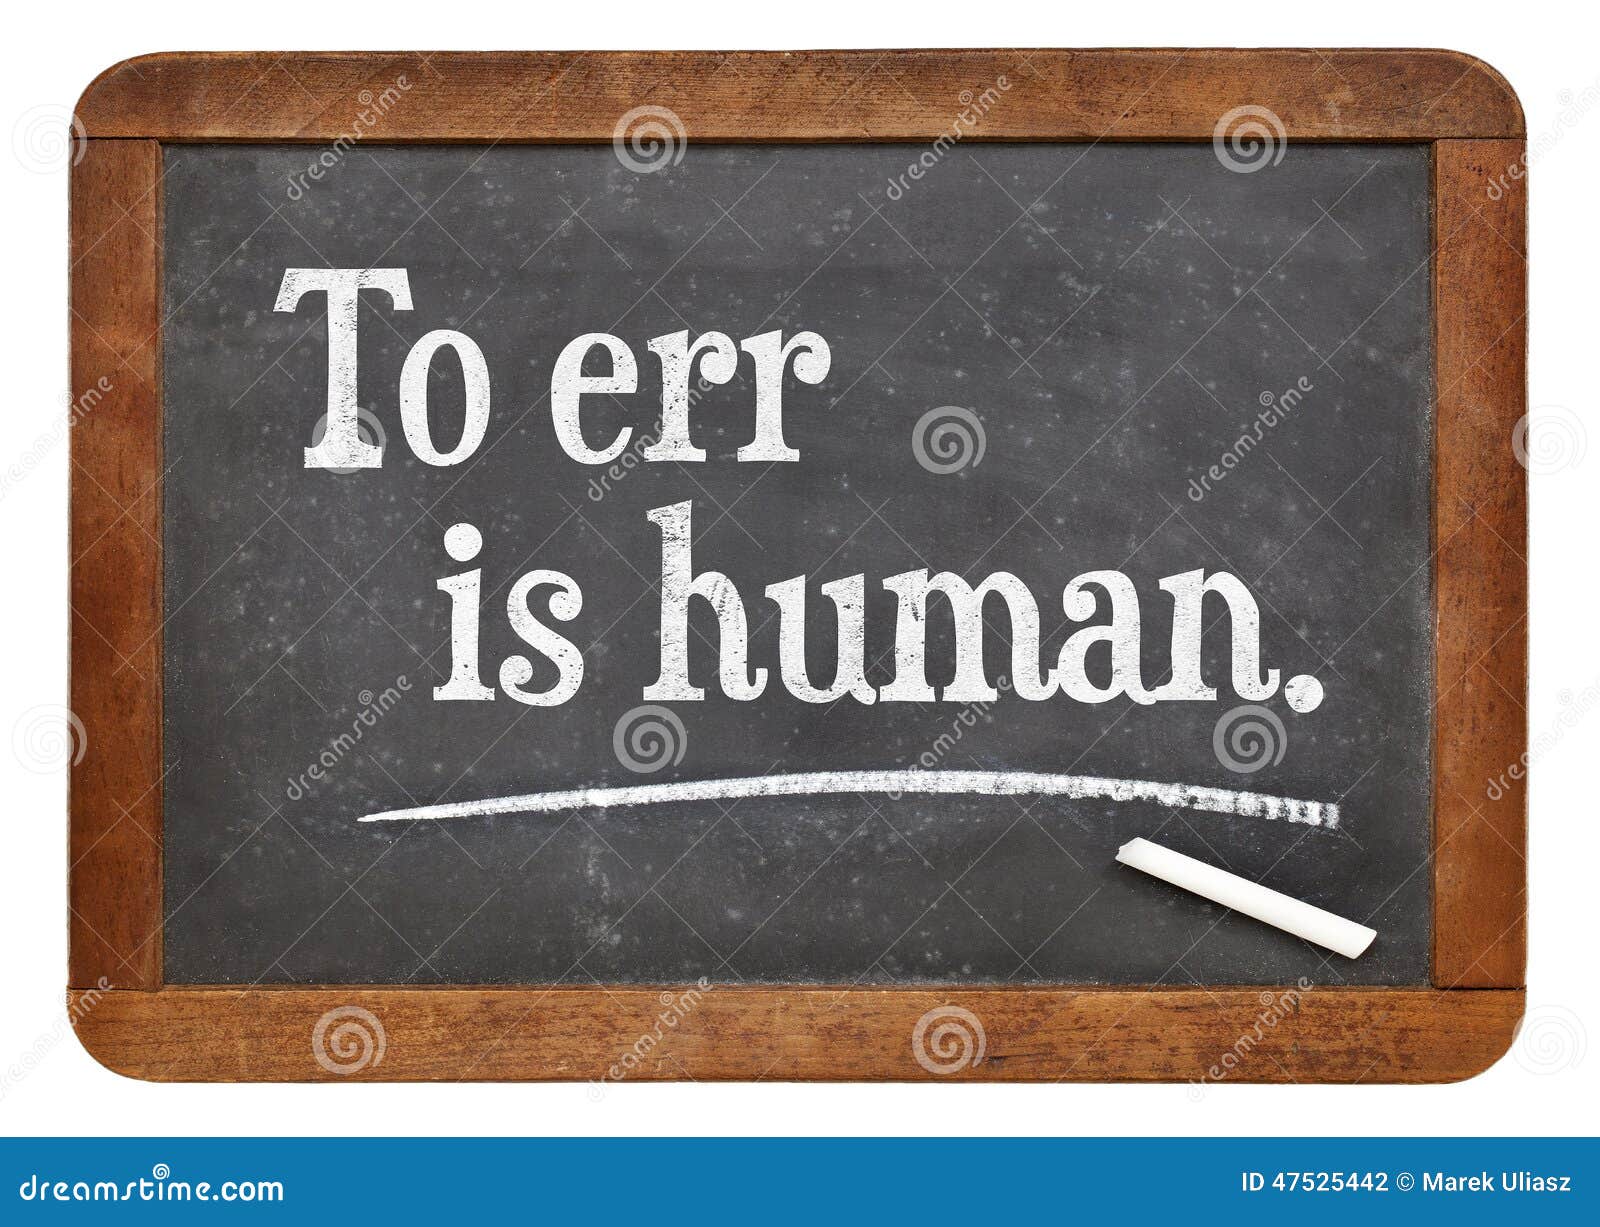 To Err is Human (English Essay, please read)